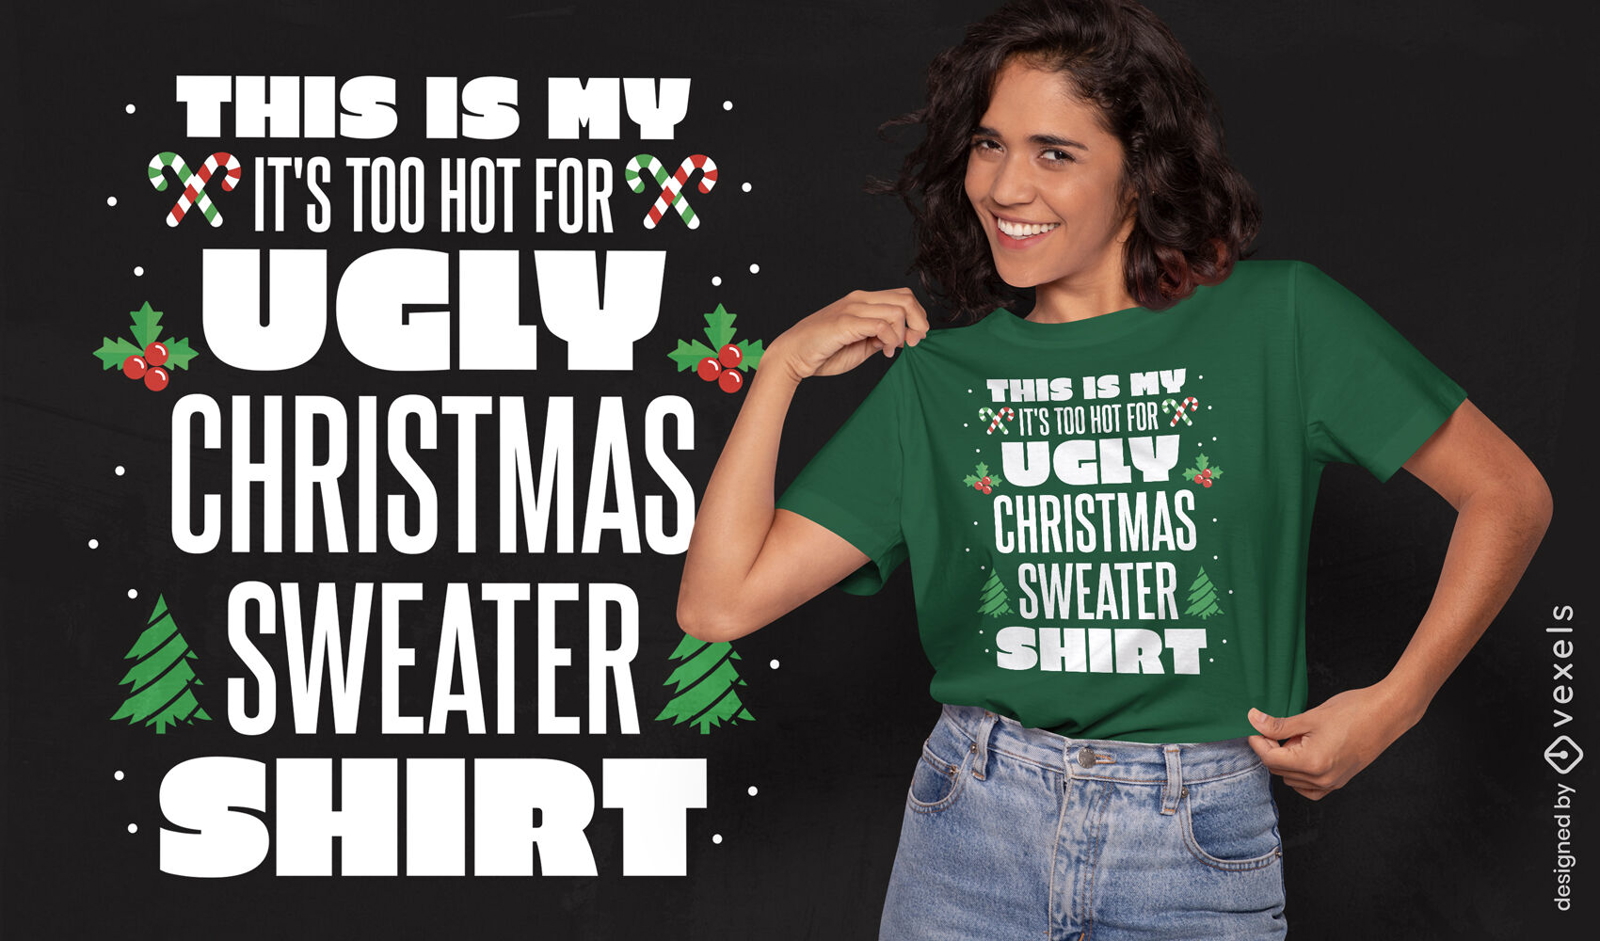 Christmas sweater quote t-shirt design